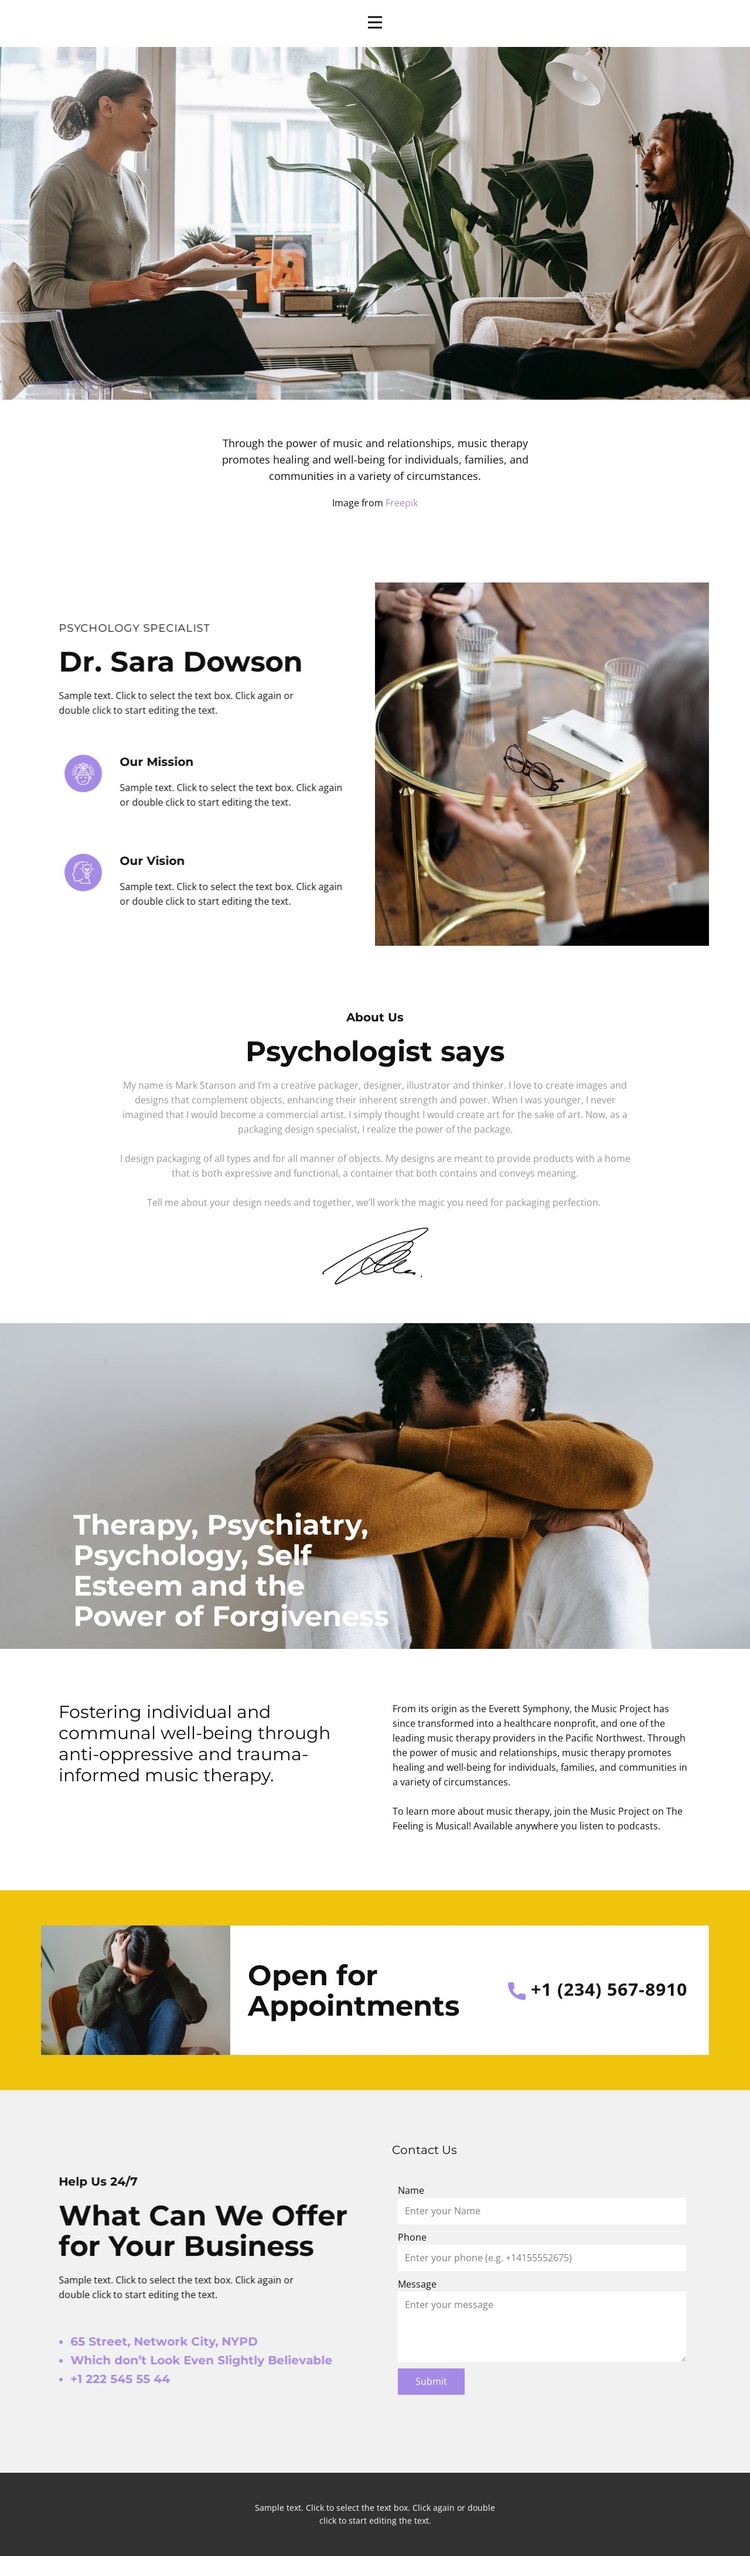 Qualified help from a psychologist Joomla Template